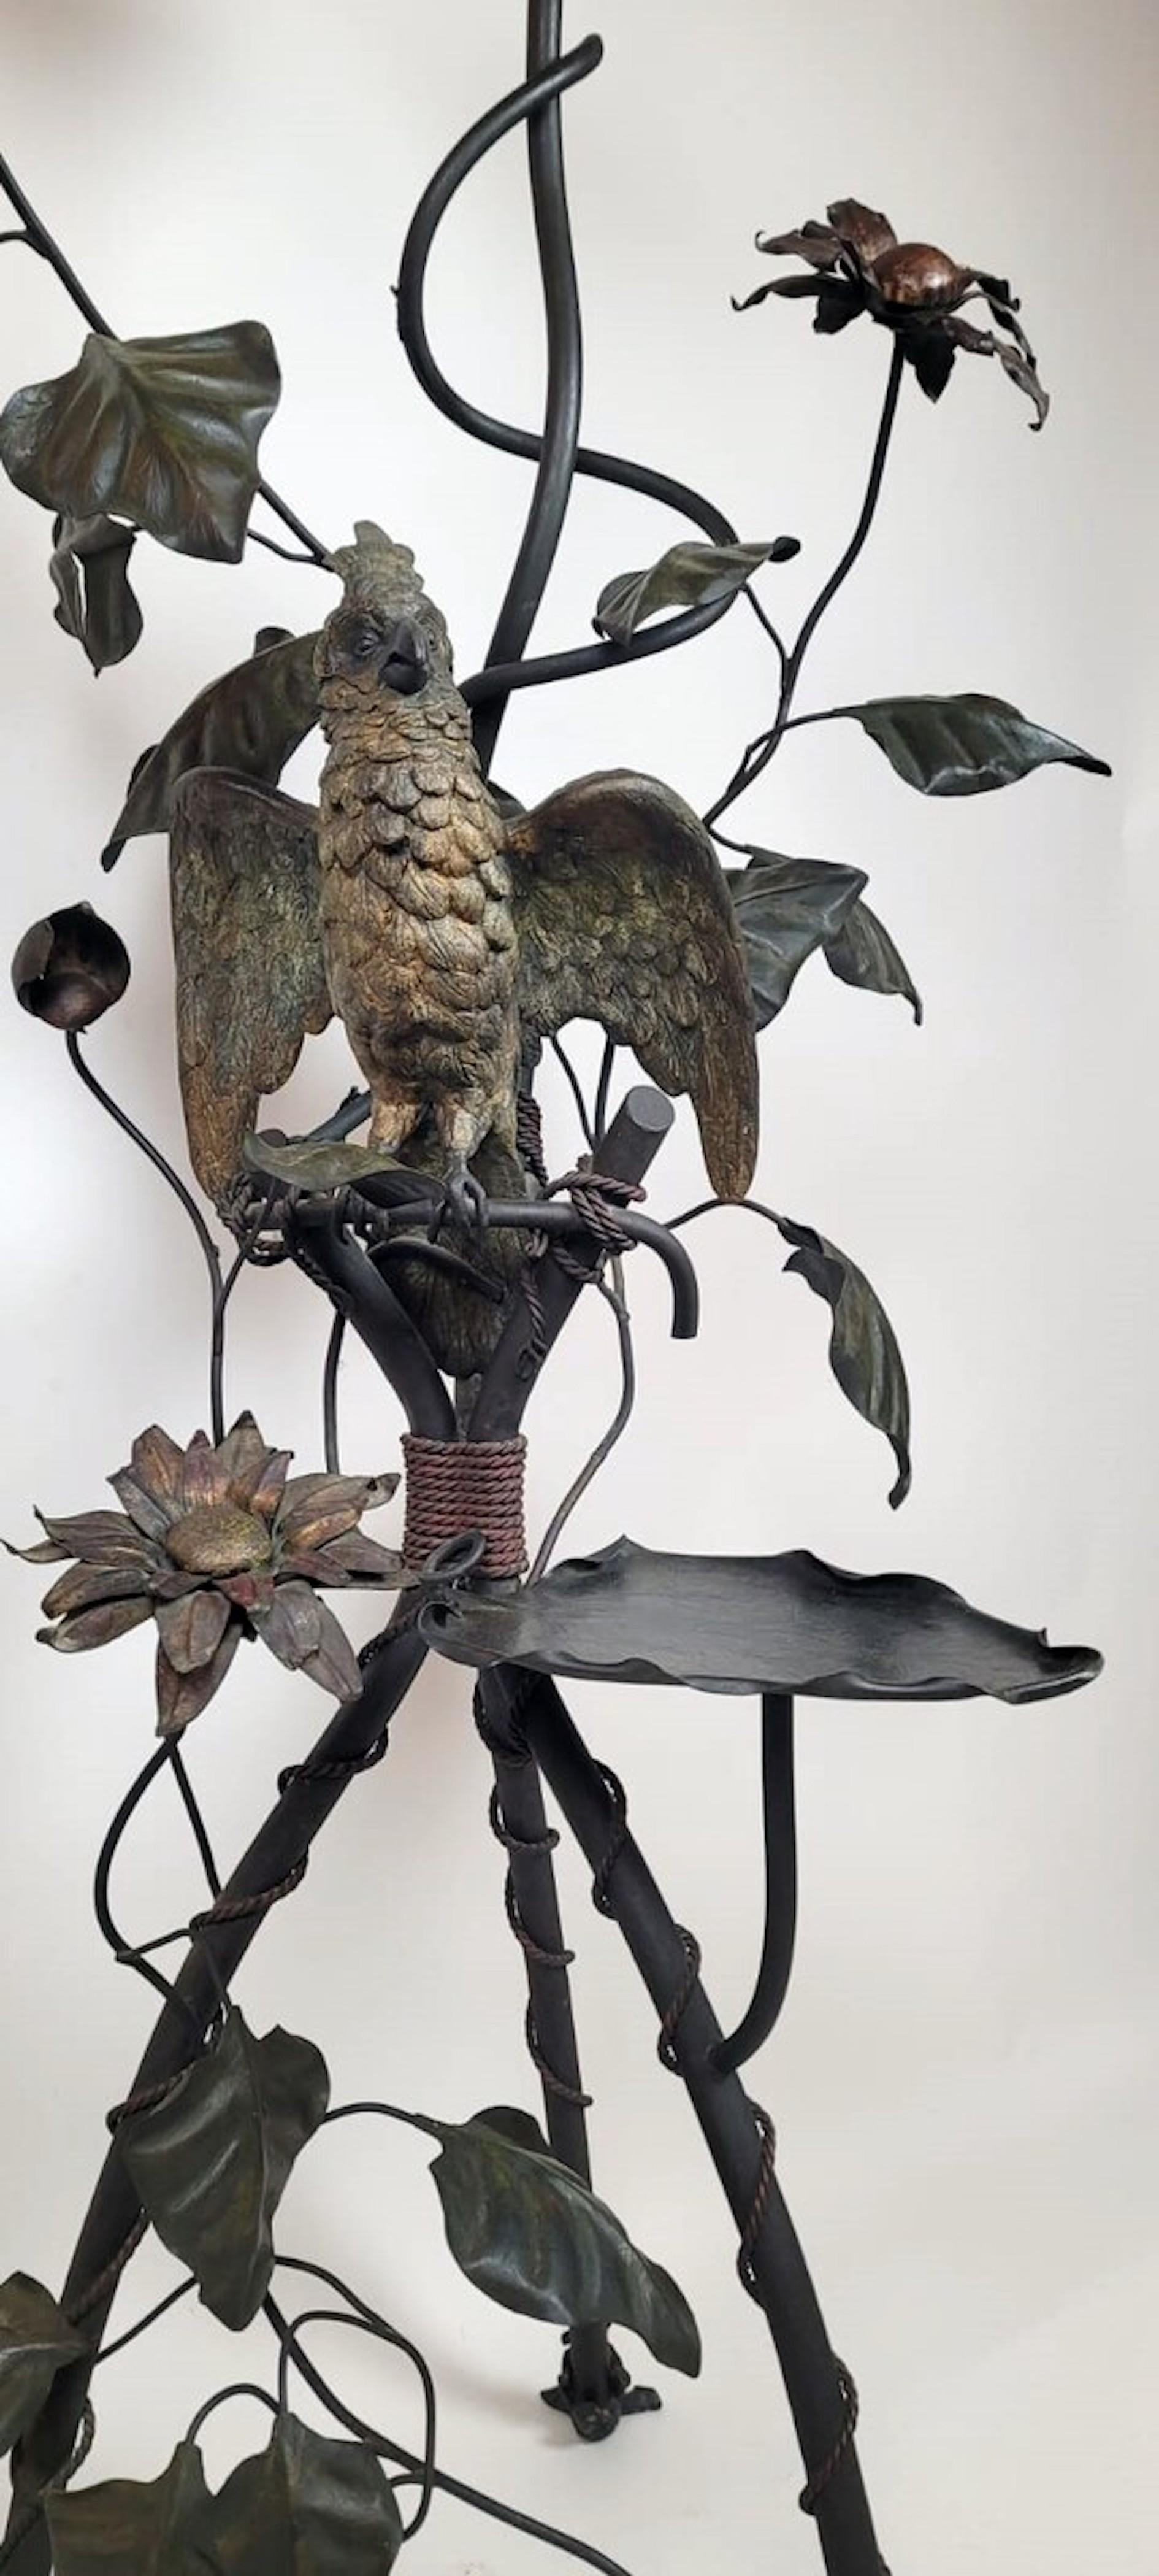 Wrought Iron Floor Lamp - Decorations With Leaves, Flowers, And Parrot In Good Condition For Sale In Brussels, BE